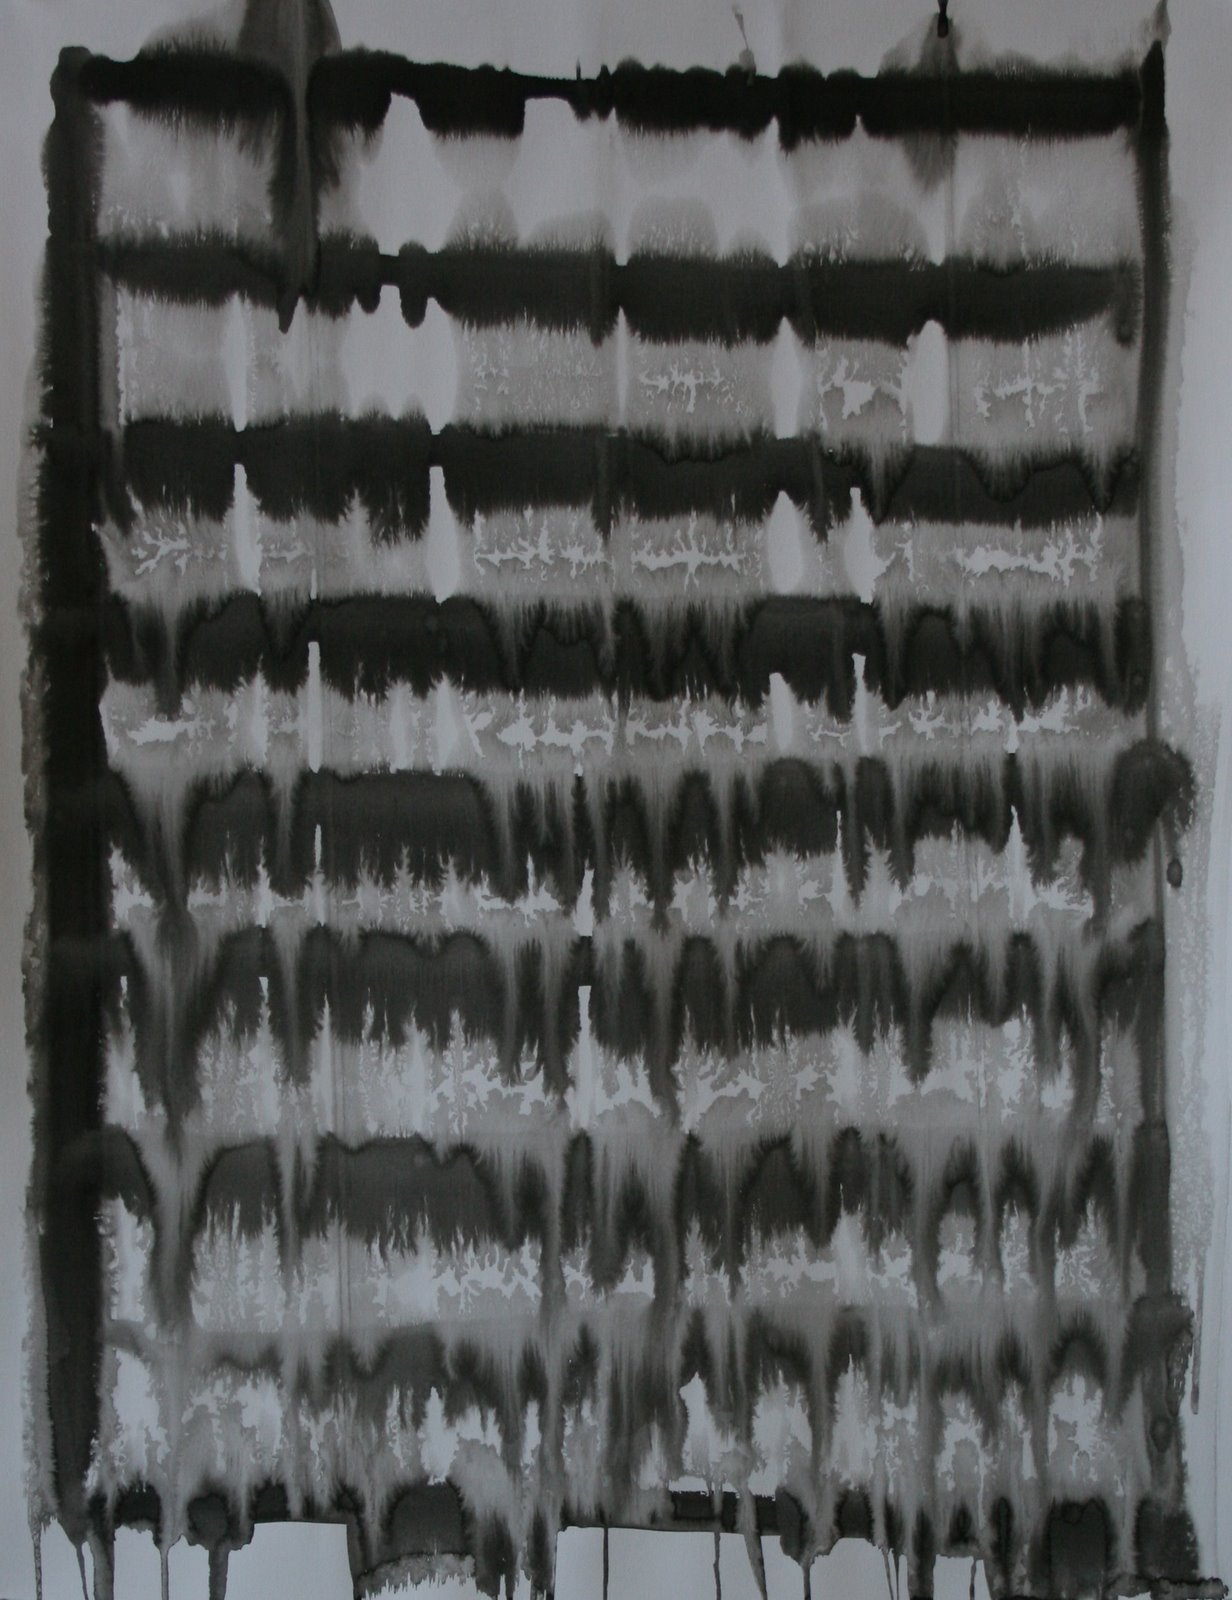 [Shannon+Barry_Pane#7_sumi+ink+on+paper_2007.jpg]